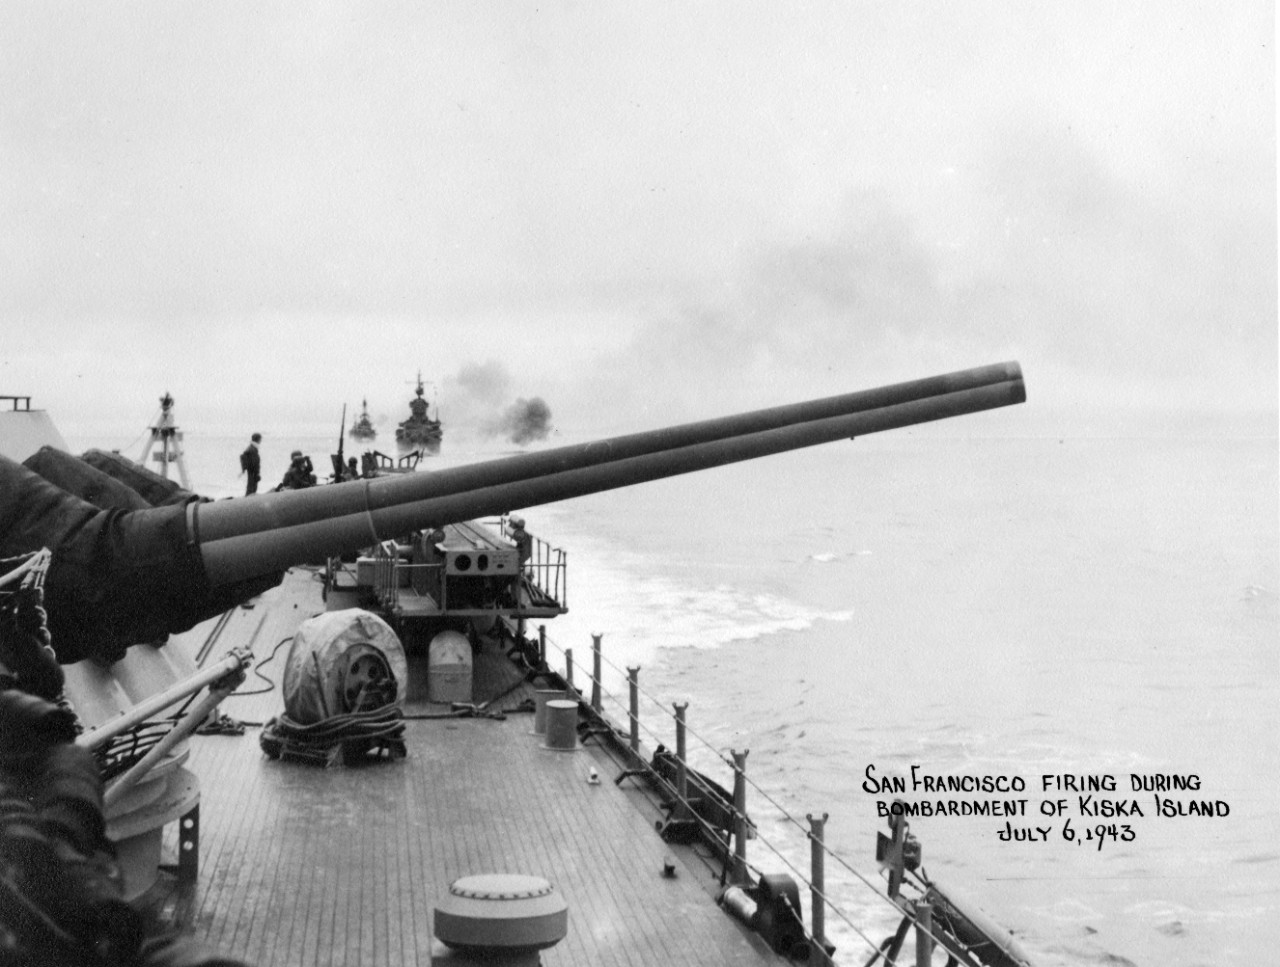 USS San Francisco (CA-38) firing during bombardment of Kiska Island, July 6, 1943. From the VADM Robert C. Giffen Photo Collection. 